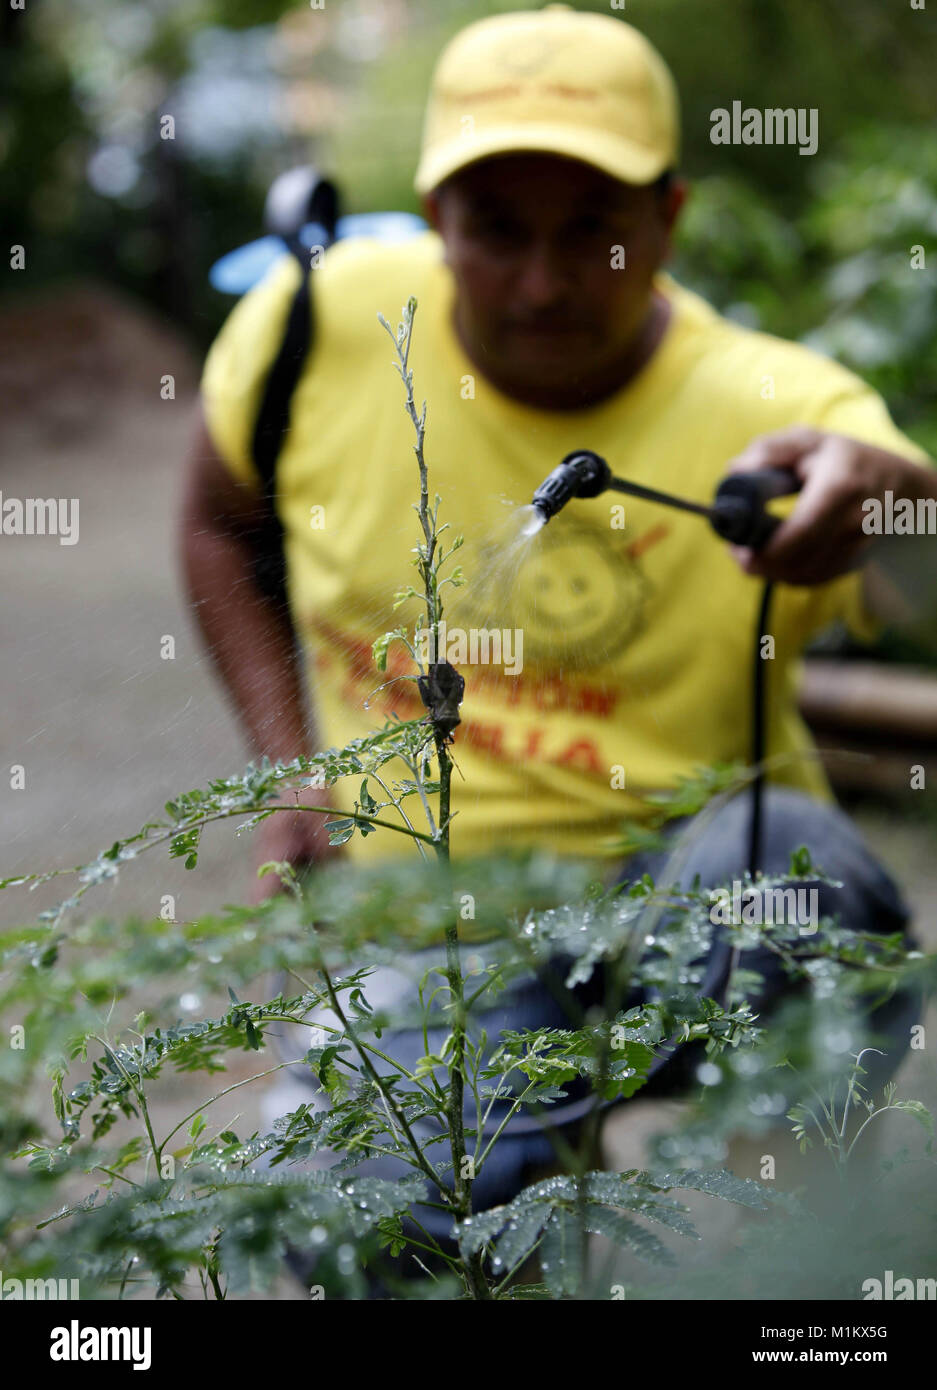 Valencia, Carabobo, Venezuela. 24th May, 2012. June 04, 2012. An employee irrigates the slurry, a natural pesticide made with green leaves of plants with strong odors and put to ferment, in the nursery of Fernando Pe''“alver Park. They do not use chemical products and last year they contributed 9 thousand plants for a reforestation campaign in Fernando Pe''“alver Park, Fernando Pe''“alver Park, founded in 1983, has 22 hectares for environmental recreation that promote the relationship between man and nature, is crossed by the river Cabriales, there are diverse ecosystems, and there is a great Stock Photo